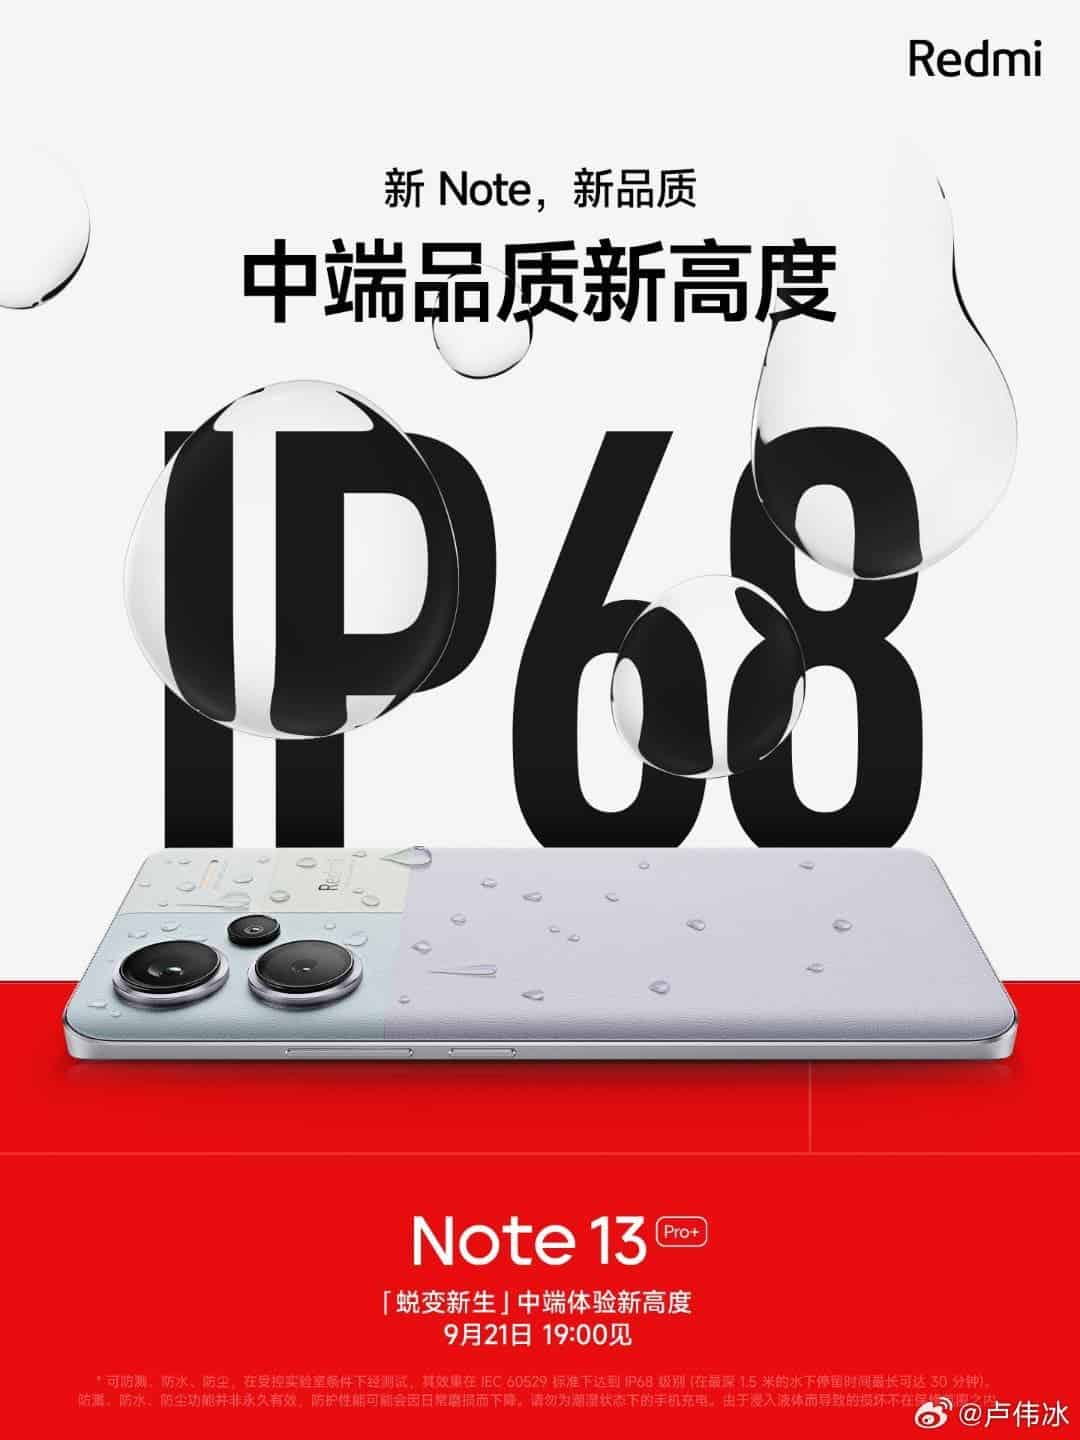 Xiaomi's upcoming Redmi Note 13 series sparks excitement